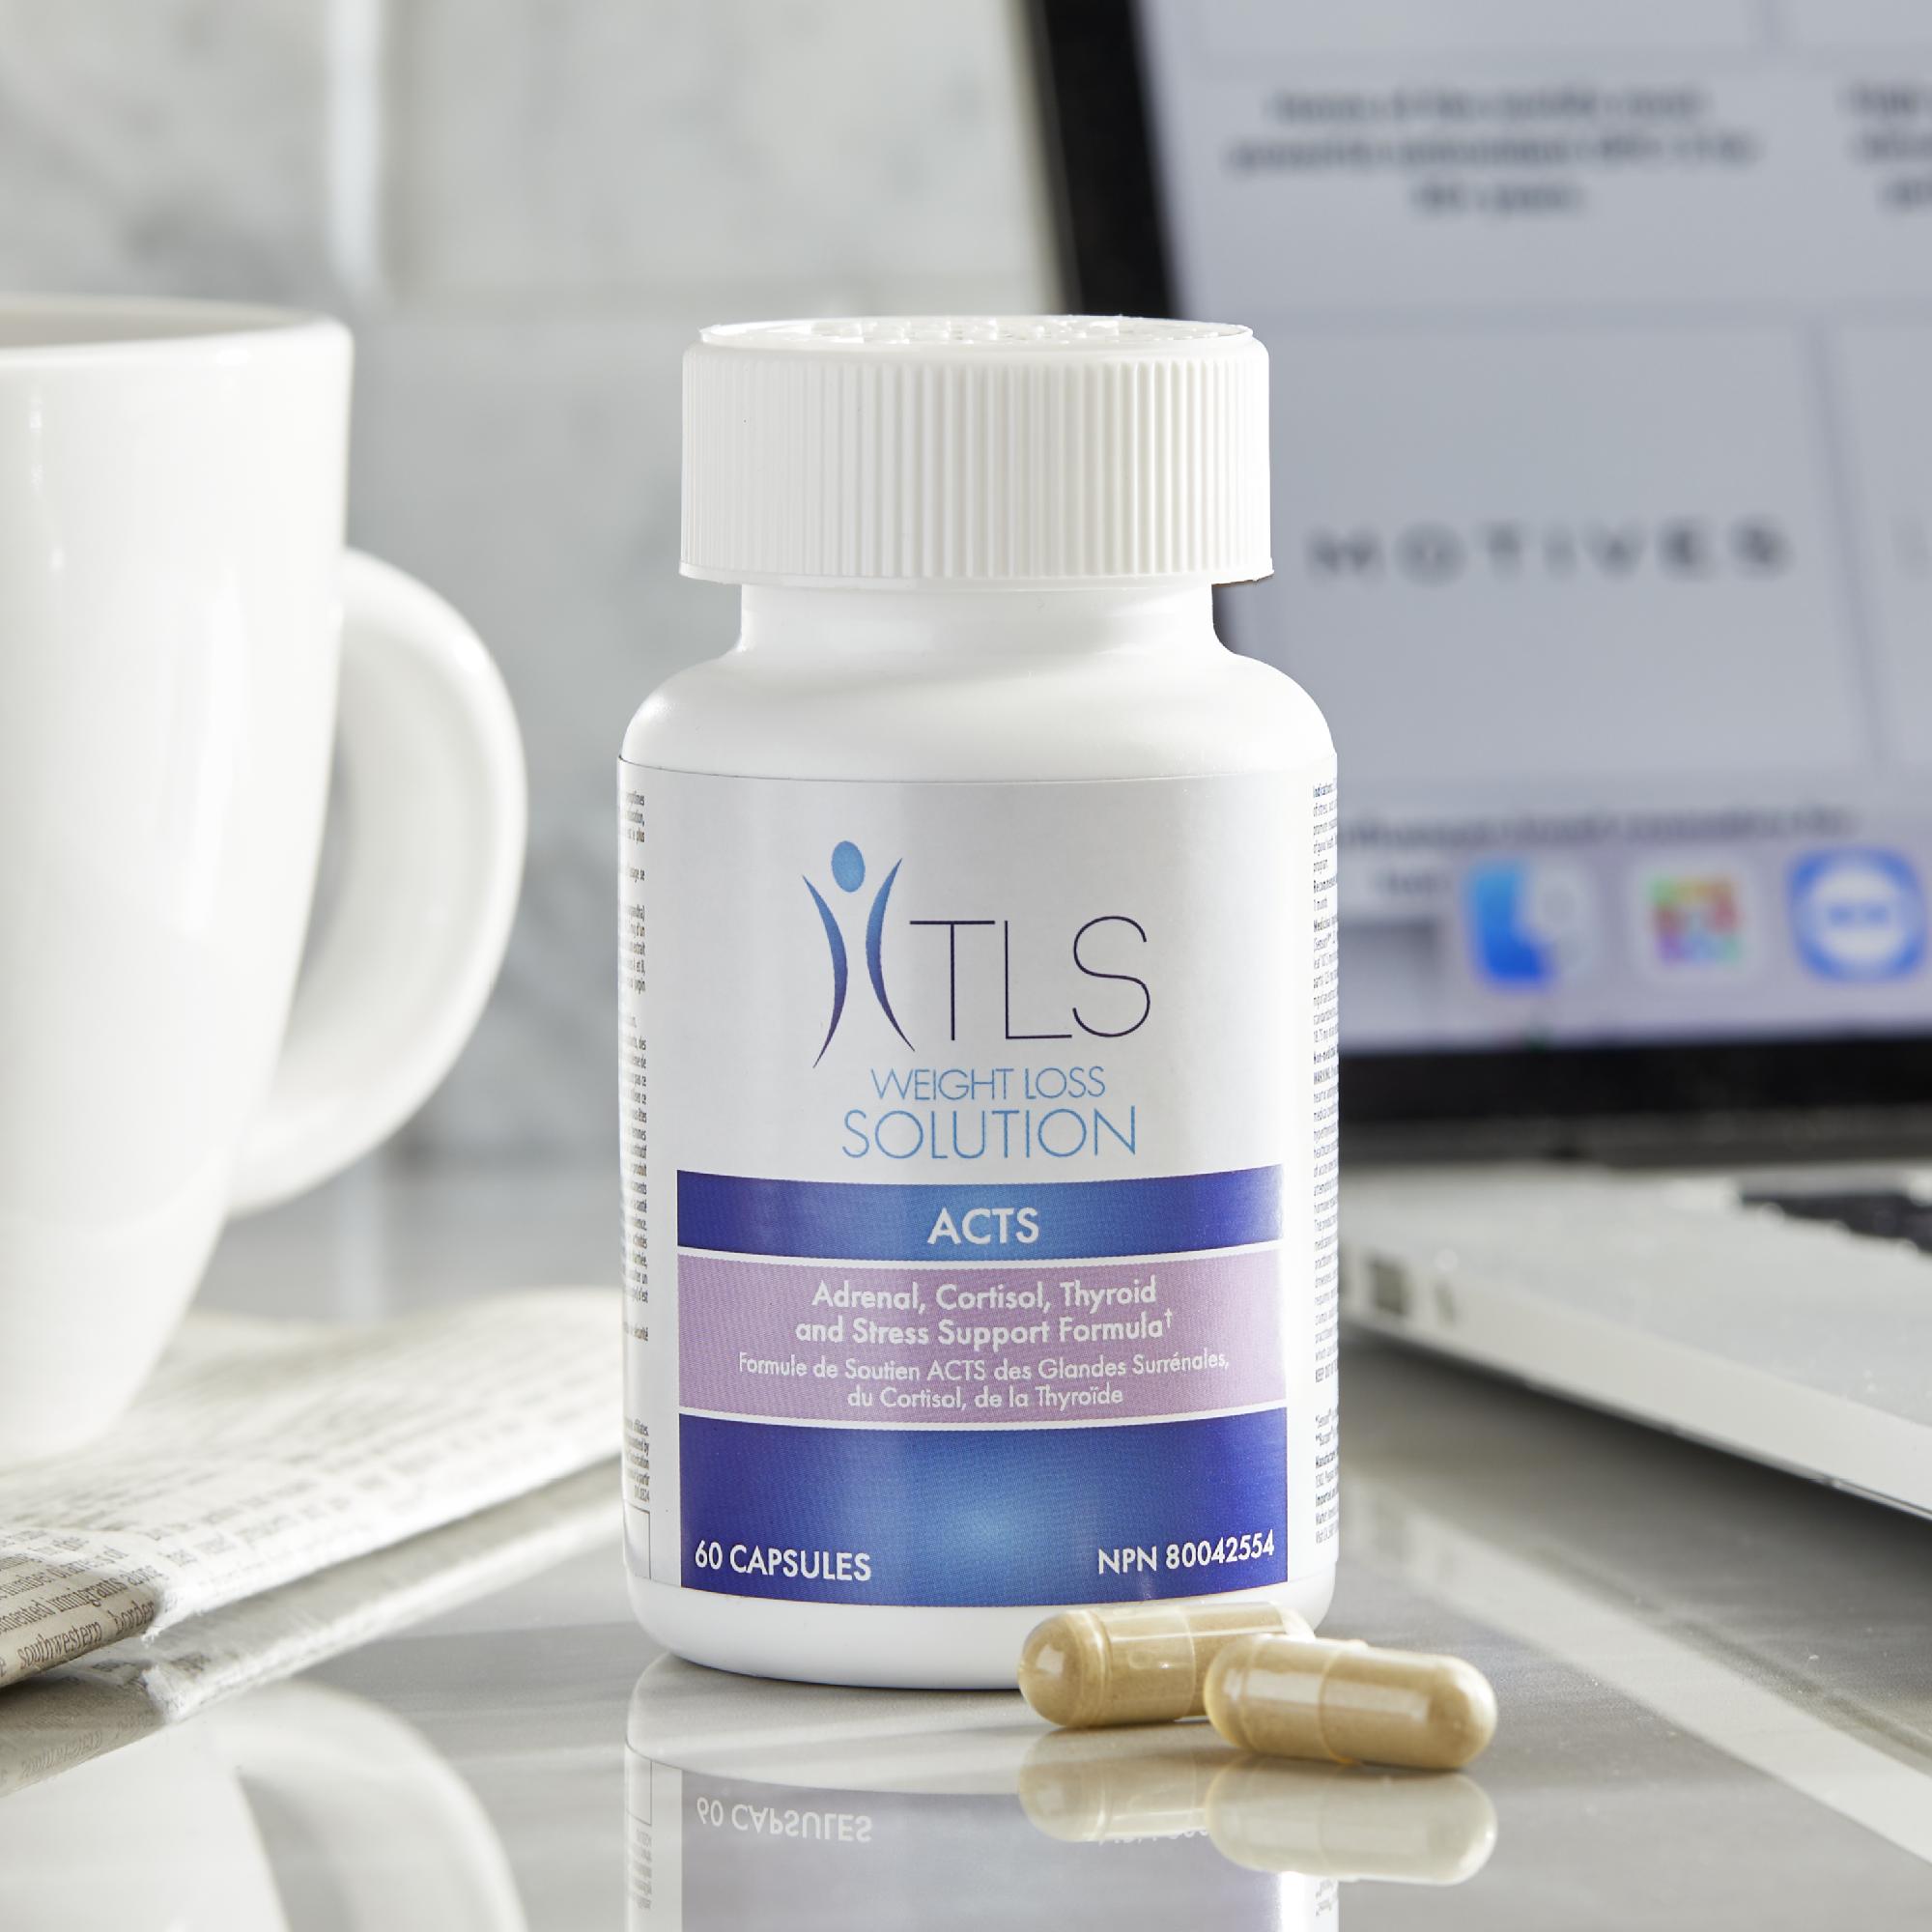 Primary Benefits of TLS ACTS Adrenal, Cortisol, Thyroid & Stress Support Formula